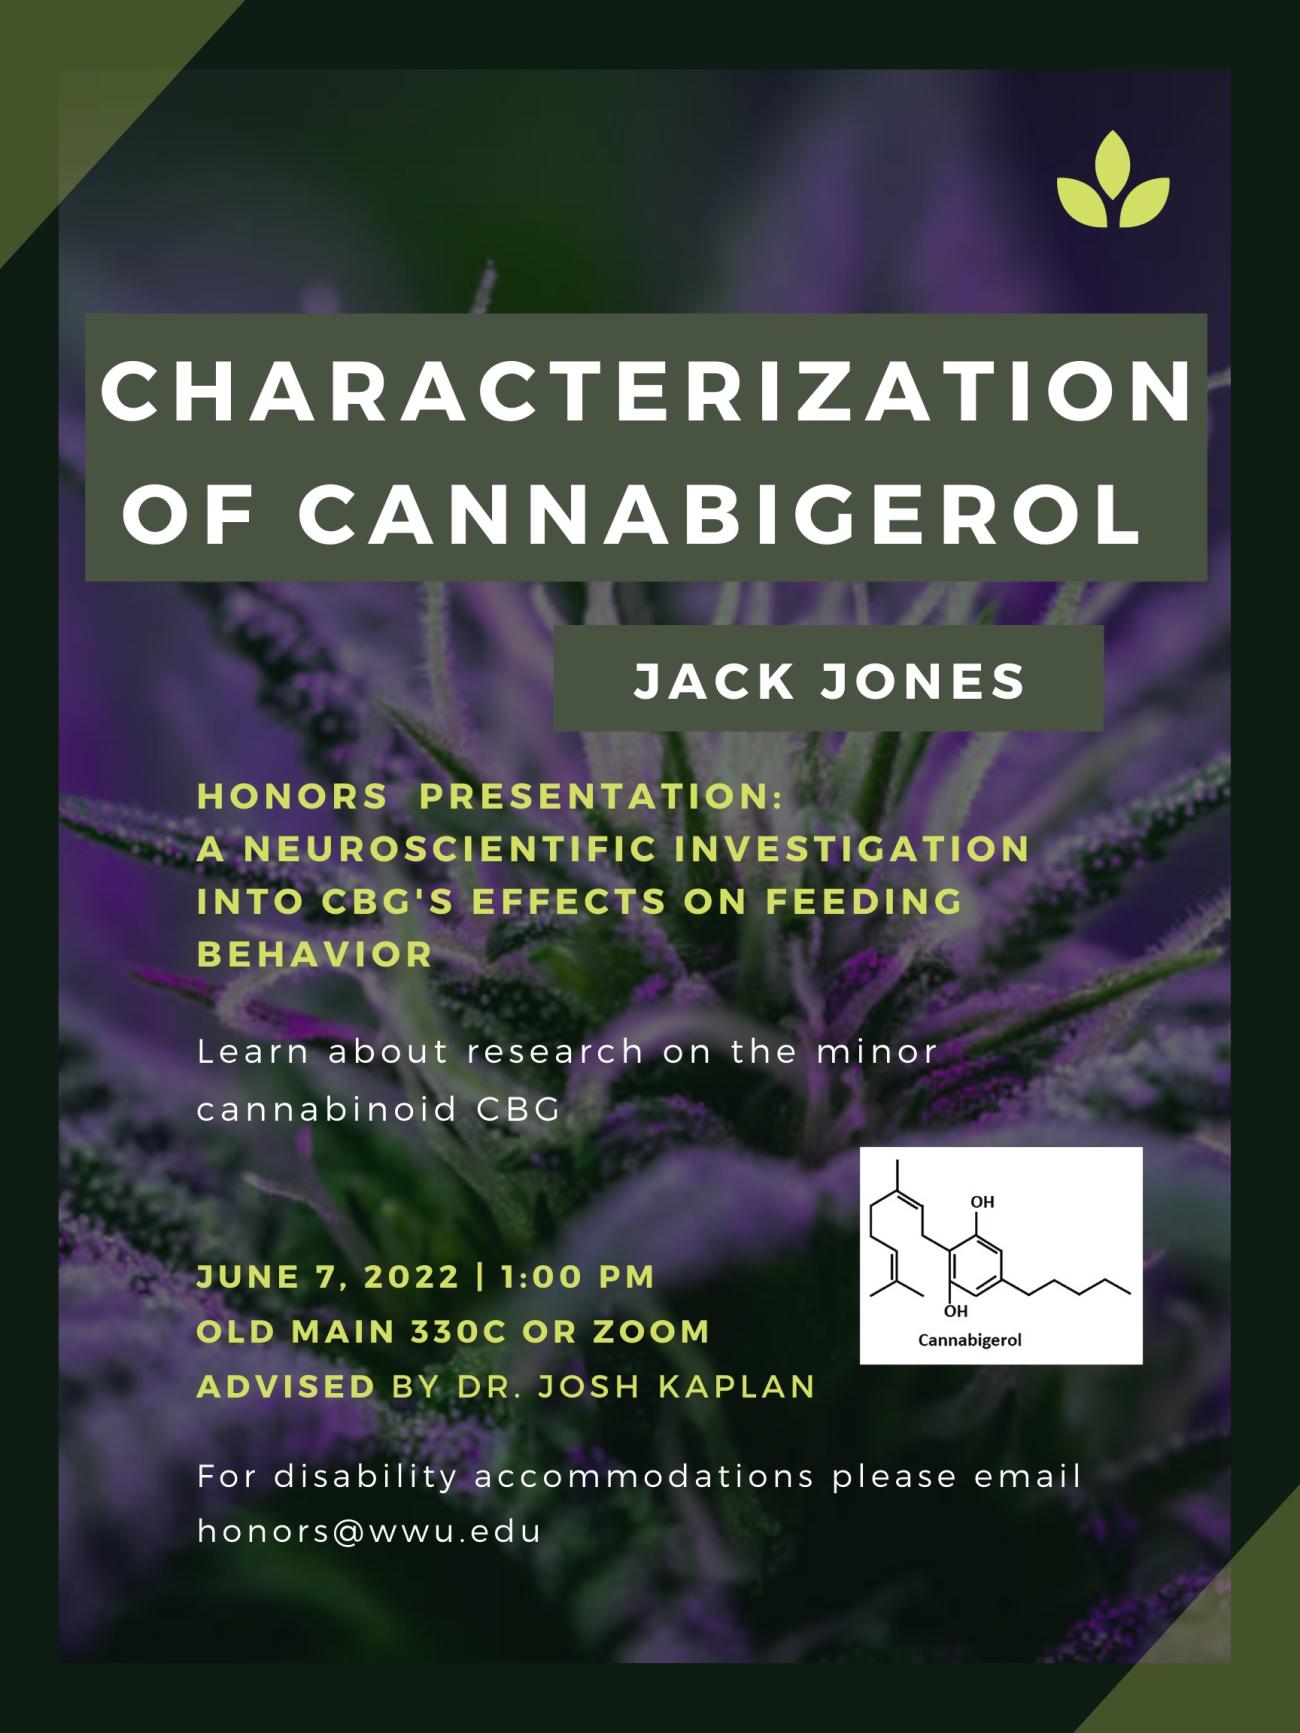 A dark green and purple poster with a close-up shot of the flowering plant Cannabis Sativa as the background. A picture of the chemical structure of CBG is present on a white background. The text reads "Characterization of Cannabigerol. Jack Jones. Honors presentation: A neuroscientific investigation into CBG's effects on feeding behavior. Learn about research on the minor cannabinoid CBG. June 7, 2022. 1pm. Old Main 330C or Zoom. Advised by Dr. Josh Kaplan. For disability accommodations please email honors